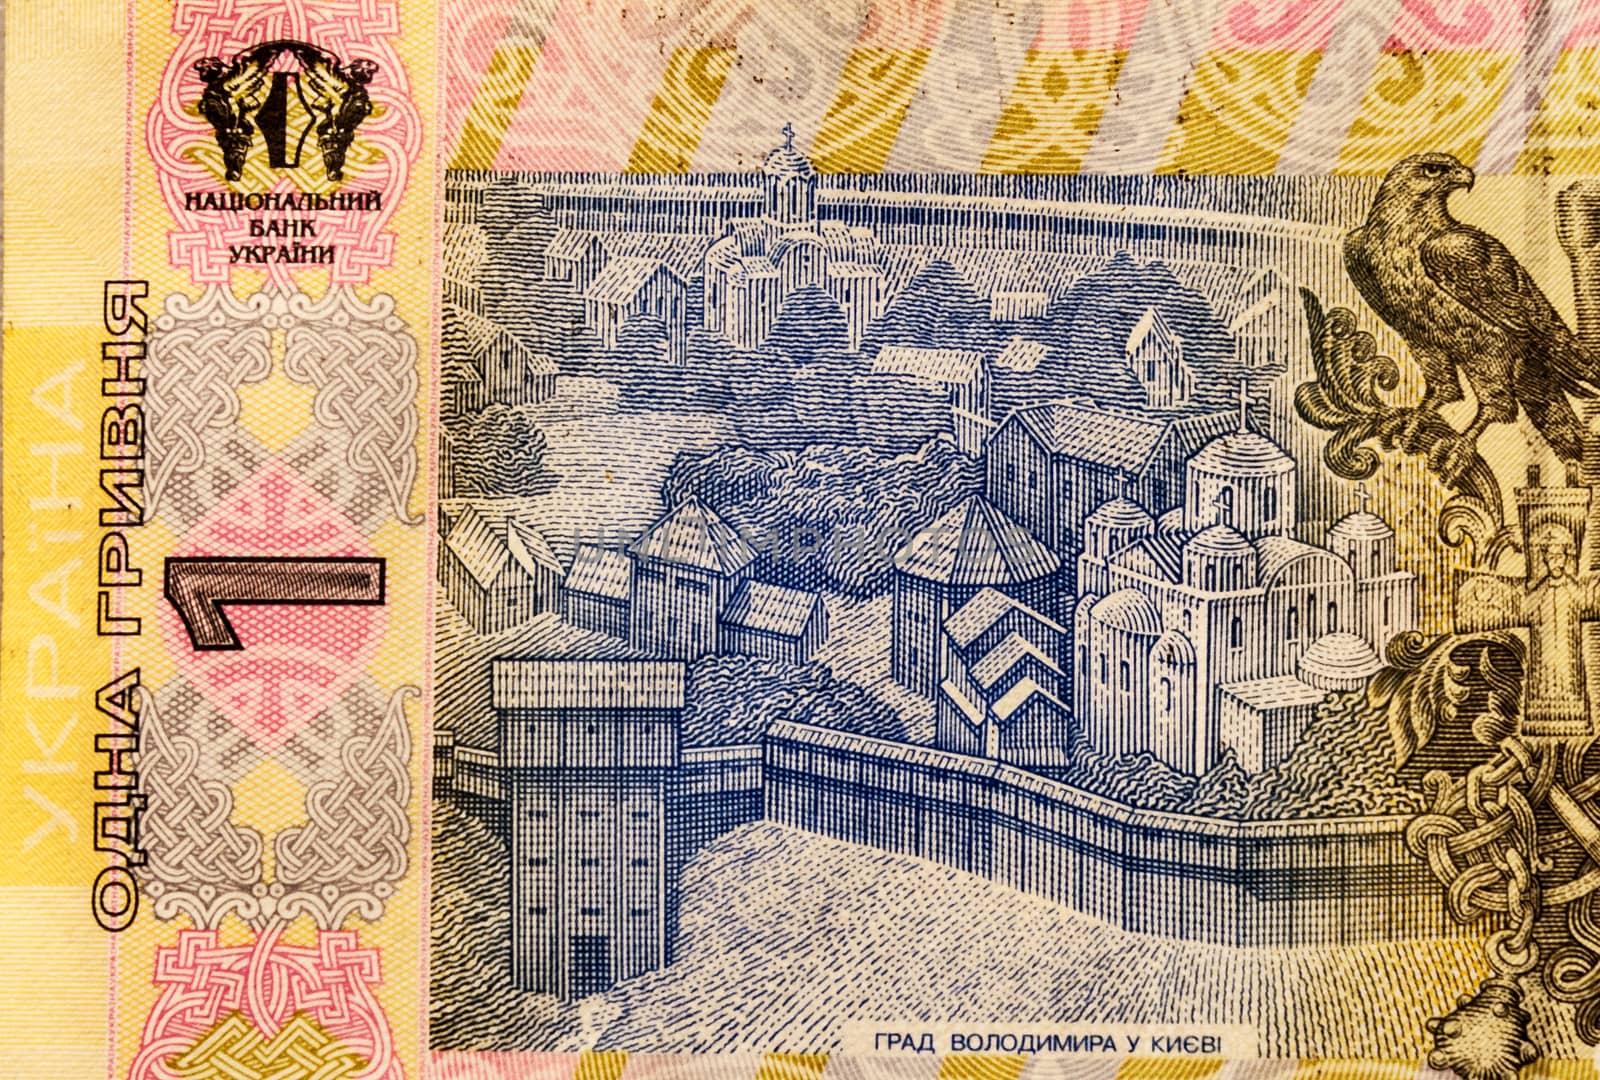 Part of the image of the sample bills 2011 National Bank of Ukra by Grommik